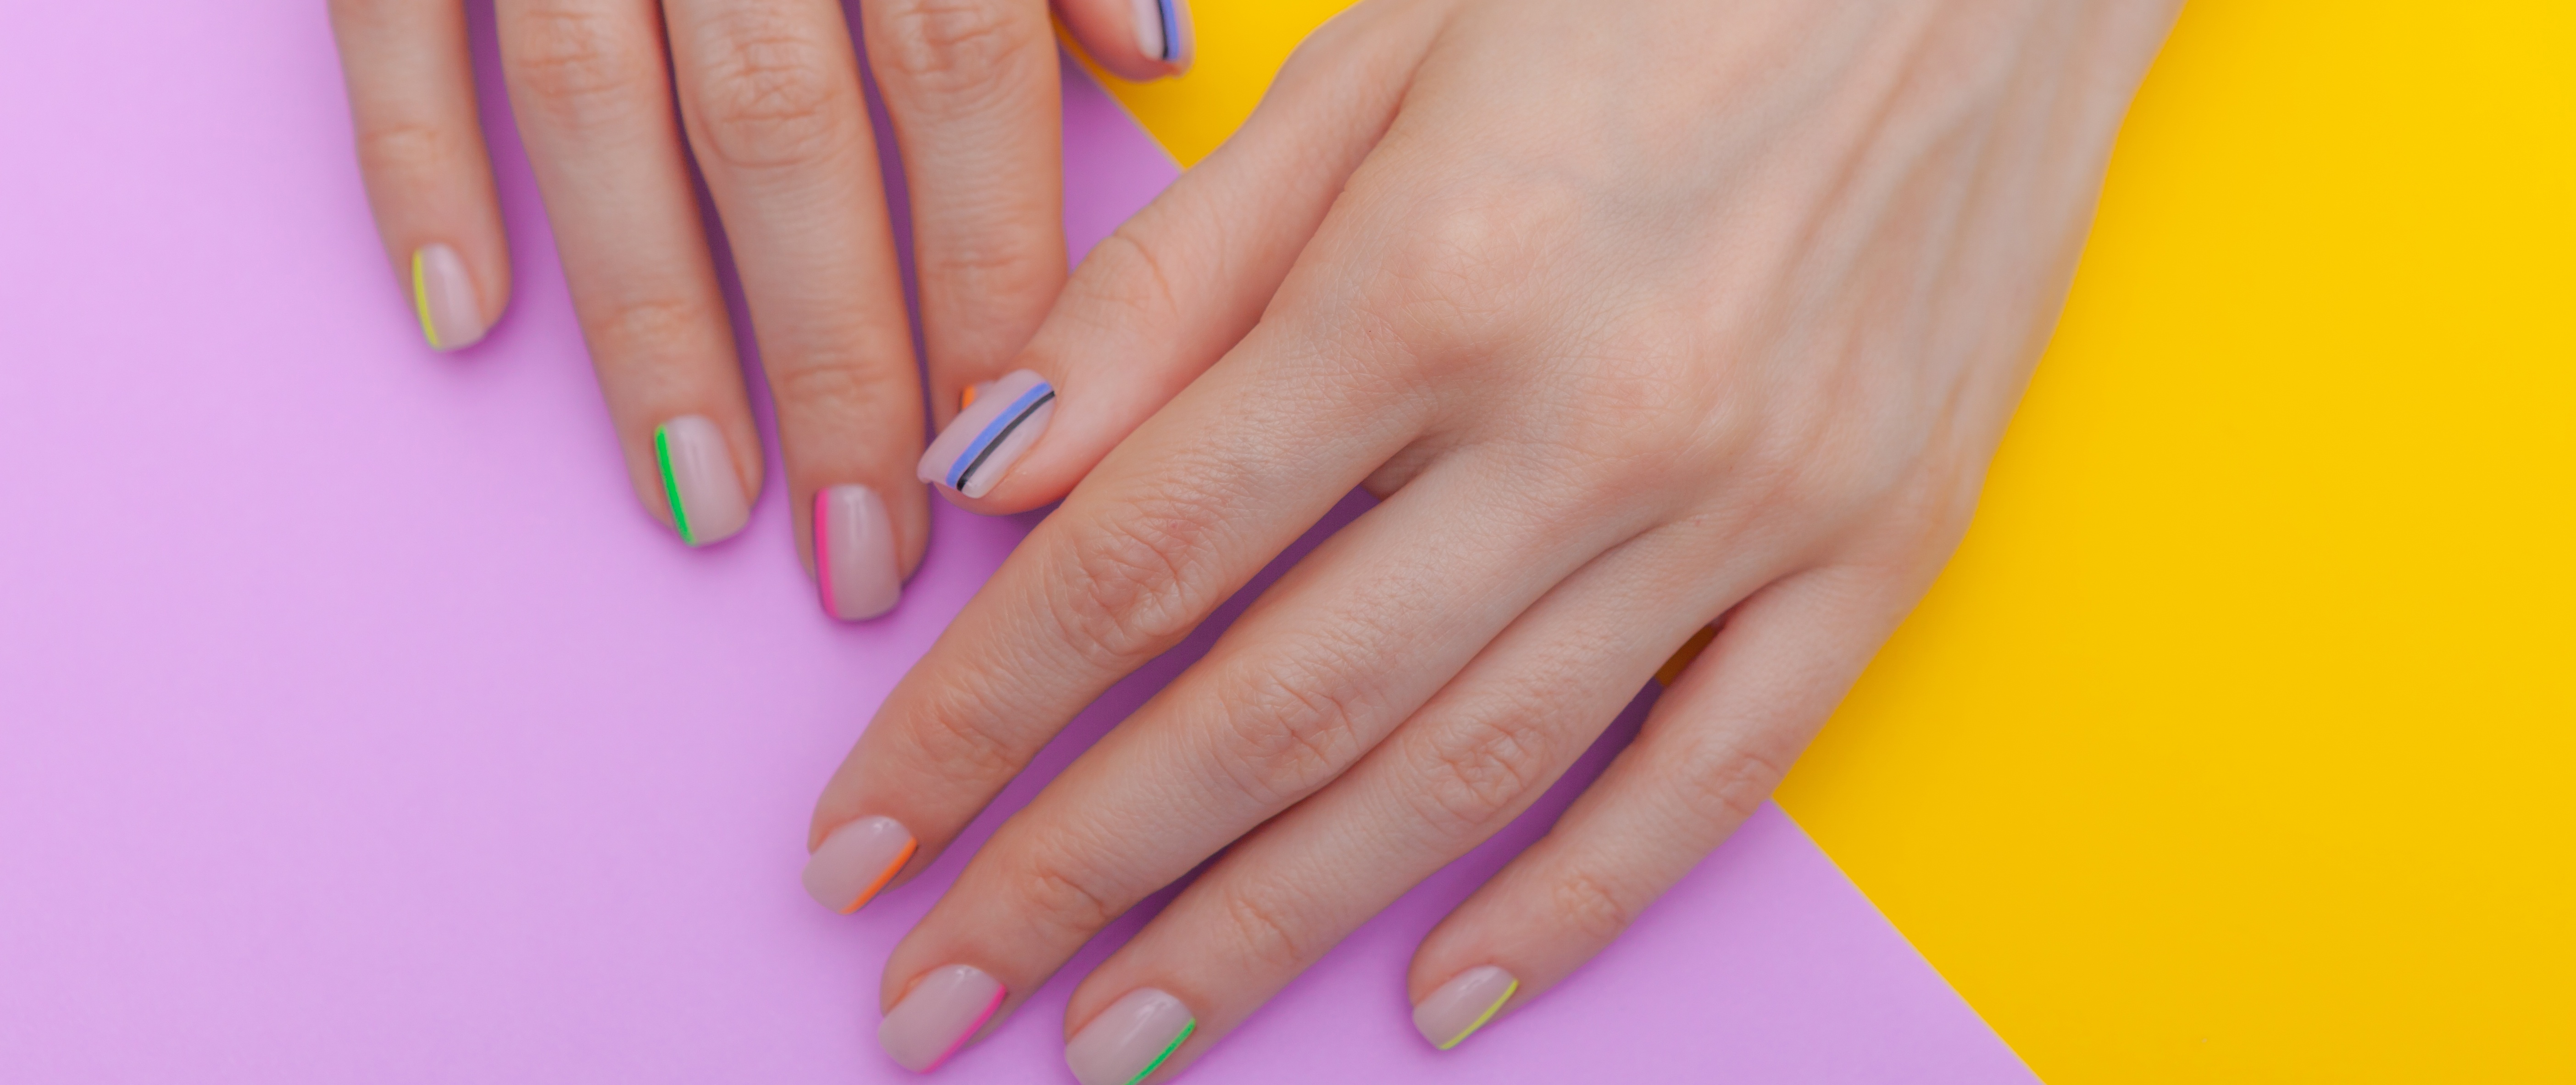 Best Nail Art Salons for Manicures and Pedicures - wide 9